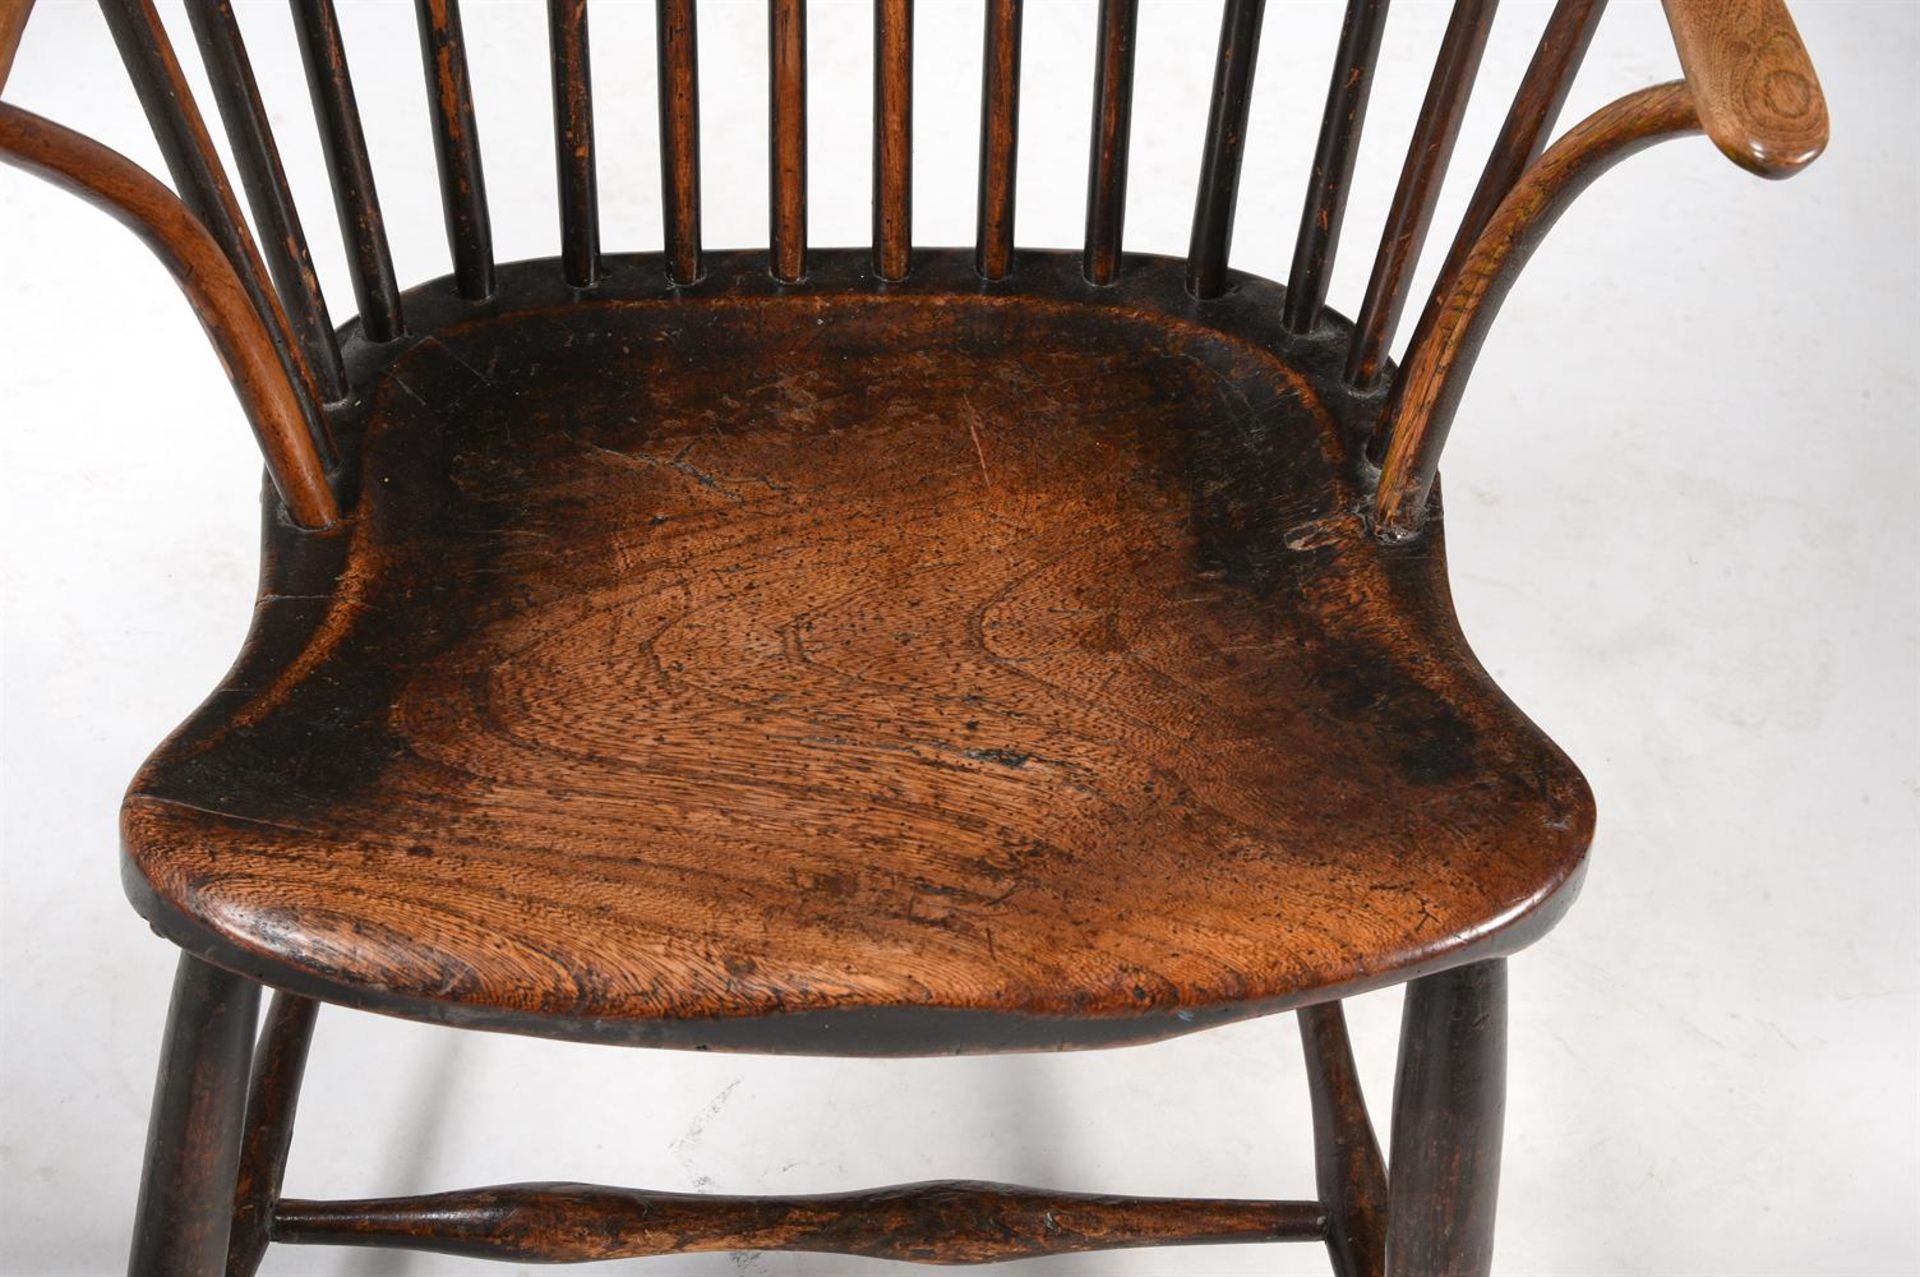 A PAIR OF FRUITWOOD, ASH AND ELM WINDSOR ARMCHAIRS, LATE 18TH/EARLY 19TH CENTURY - Image 5 of 6